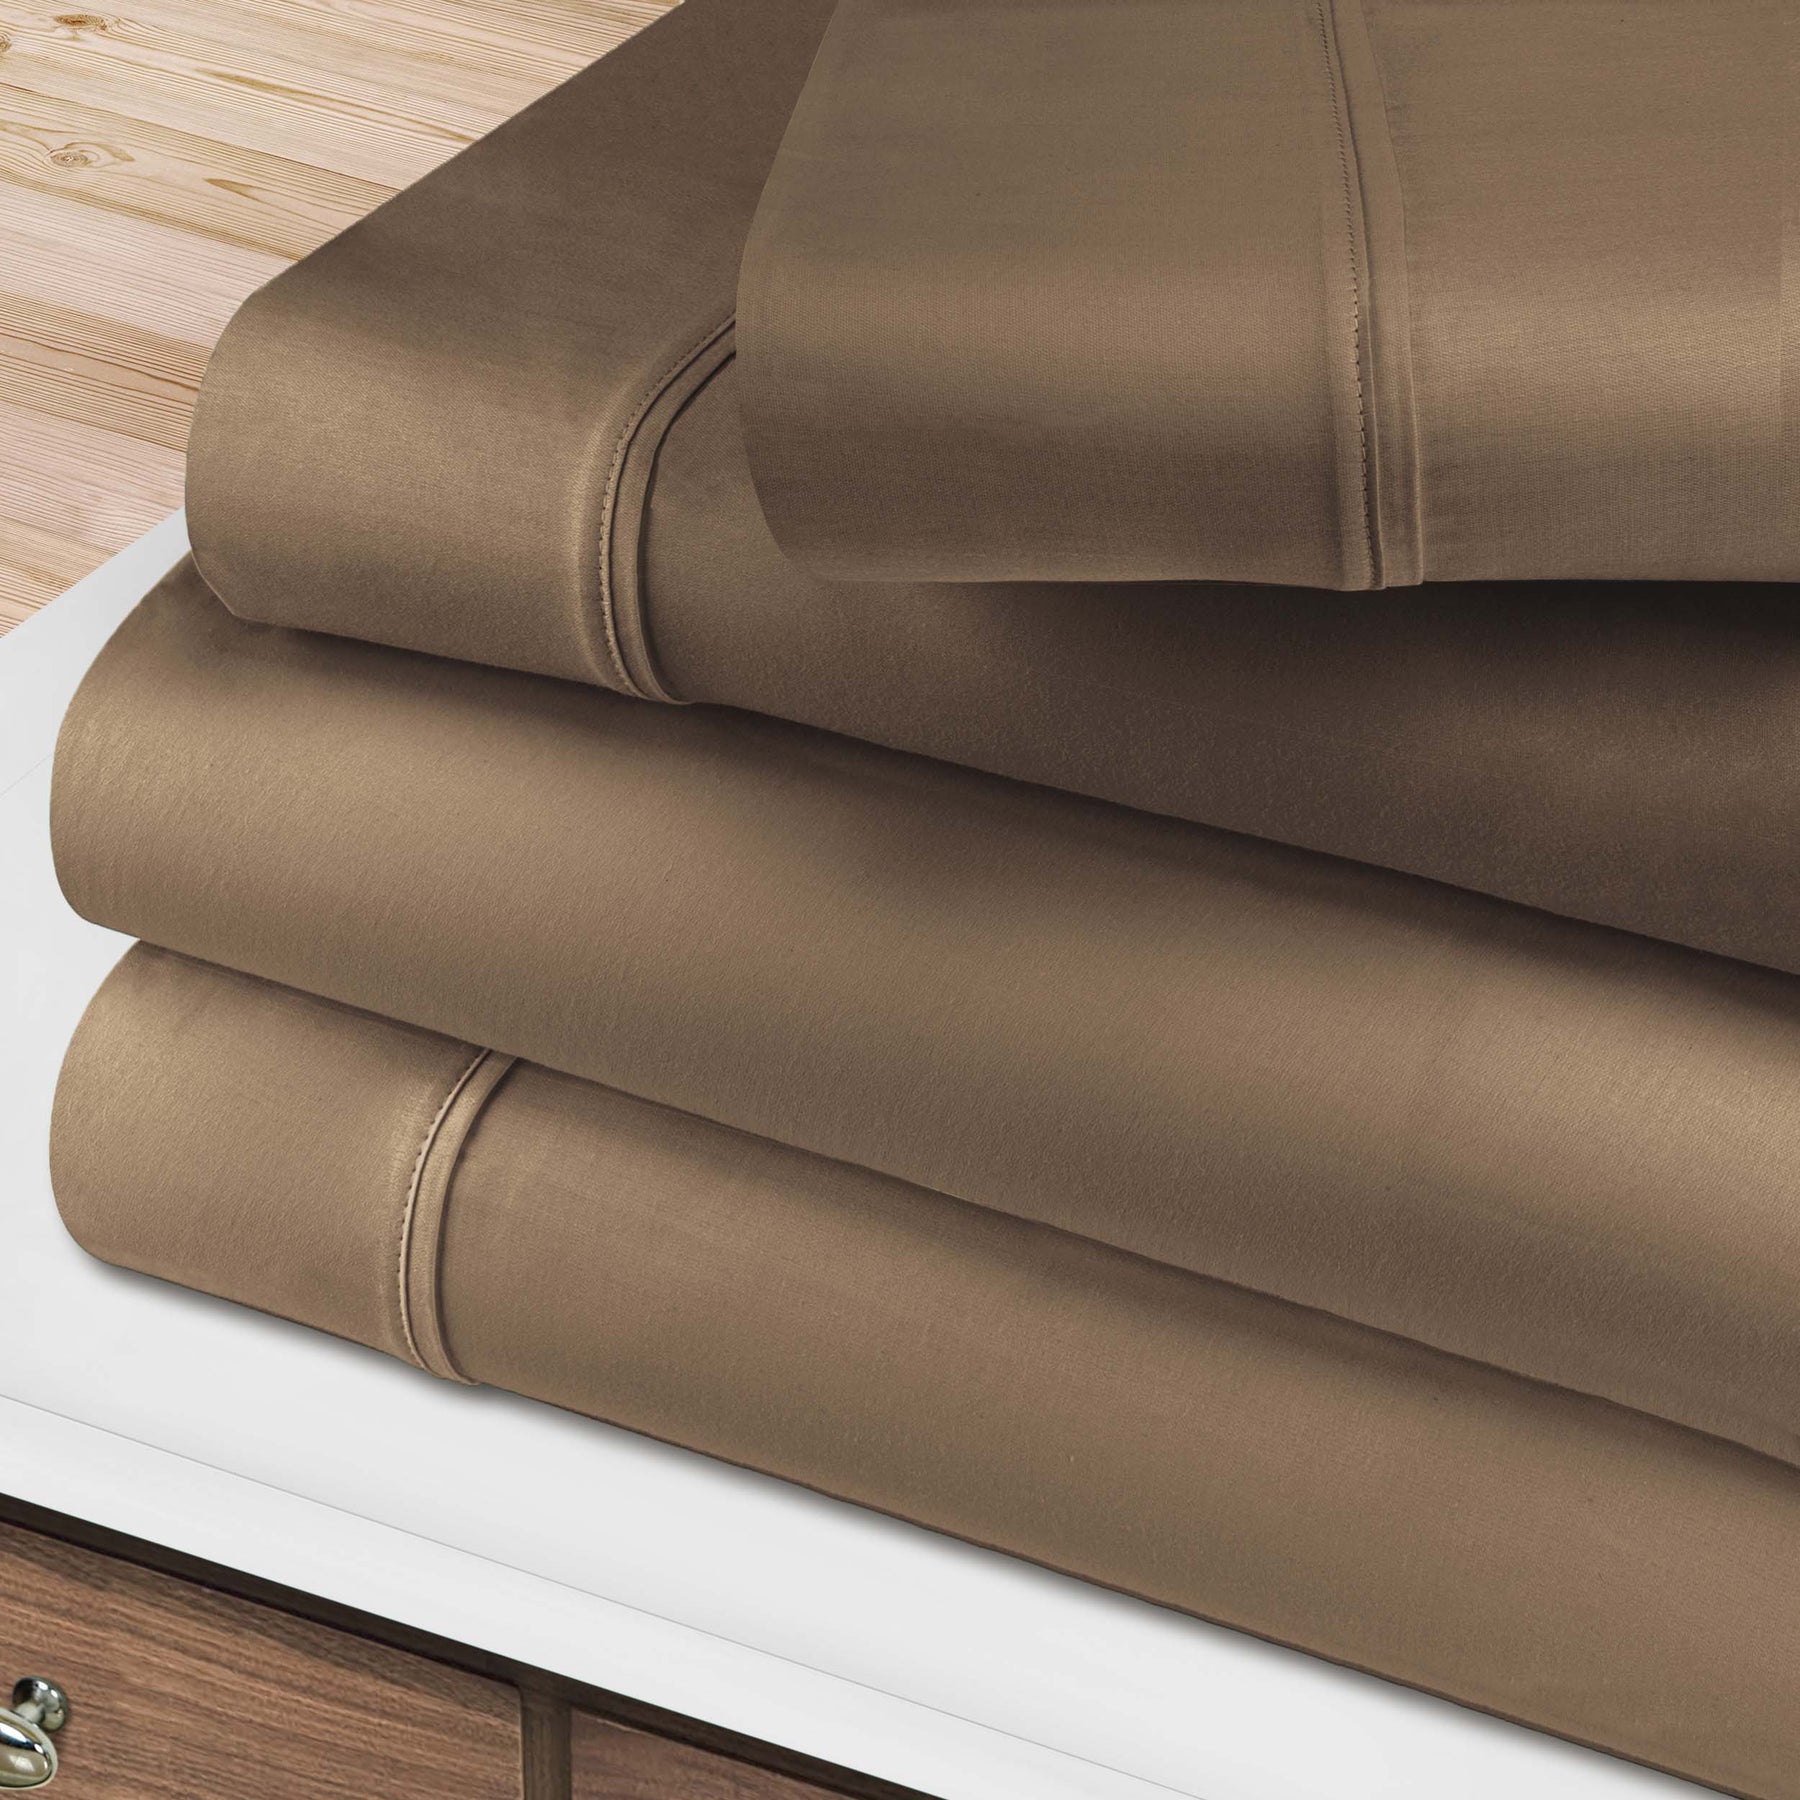 Superior 400 Thread Count Solid 100% Egyptian Cotton Deep Pocket Sheet Set - Taupe